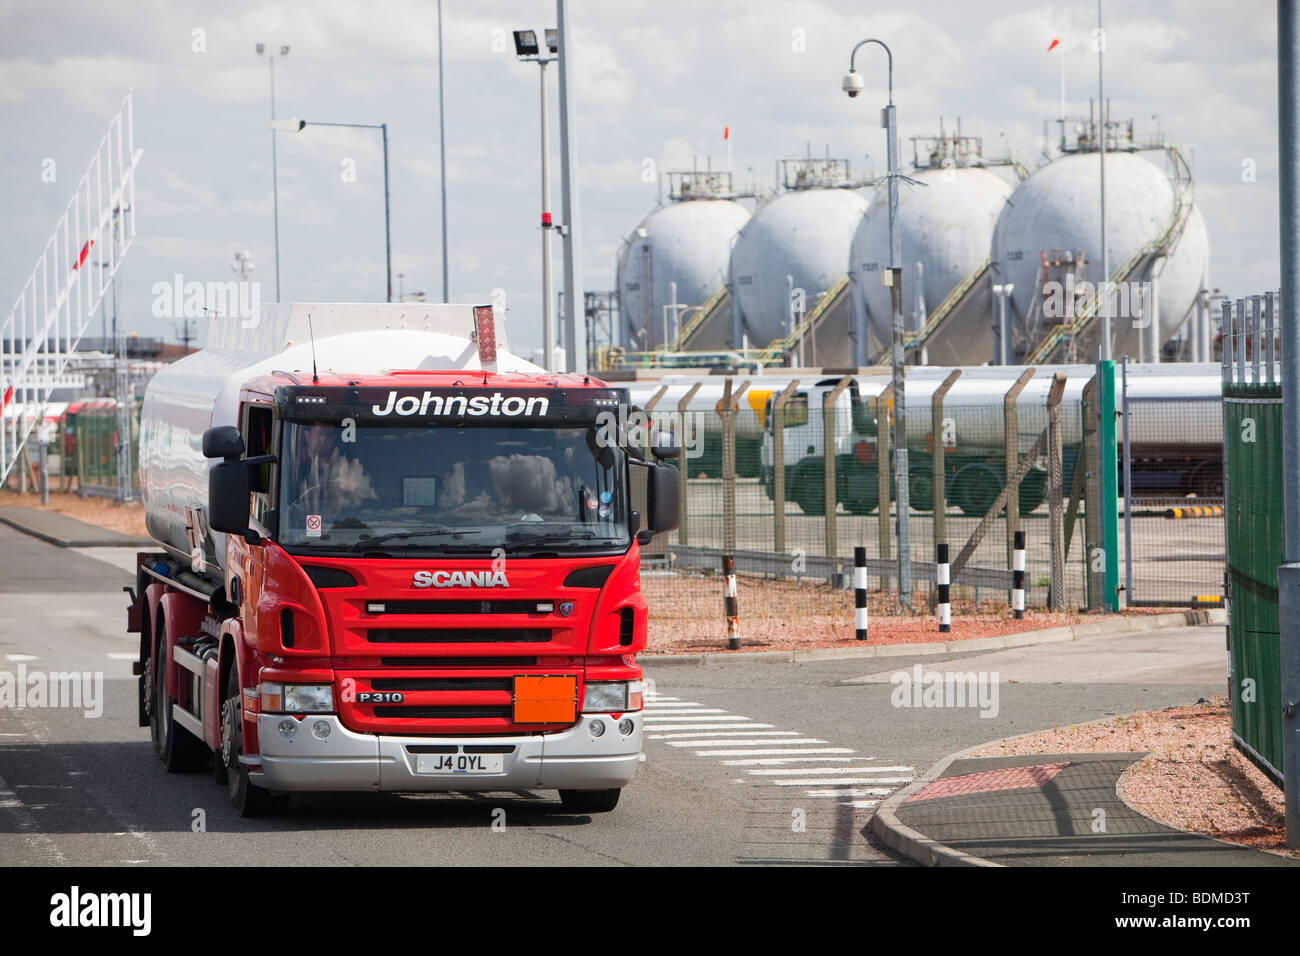 Petrol tankers at the Ineos oil refinery in Grangemouth Scotland, UK. The site is responsible for massive C02 emissions. Stock Photo